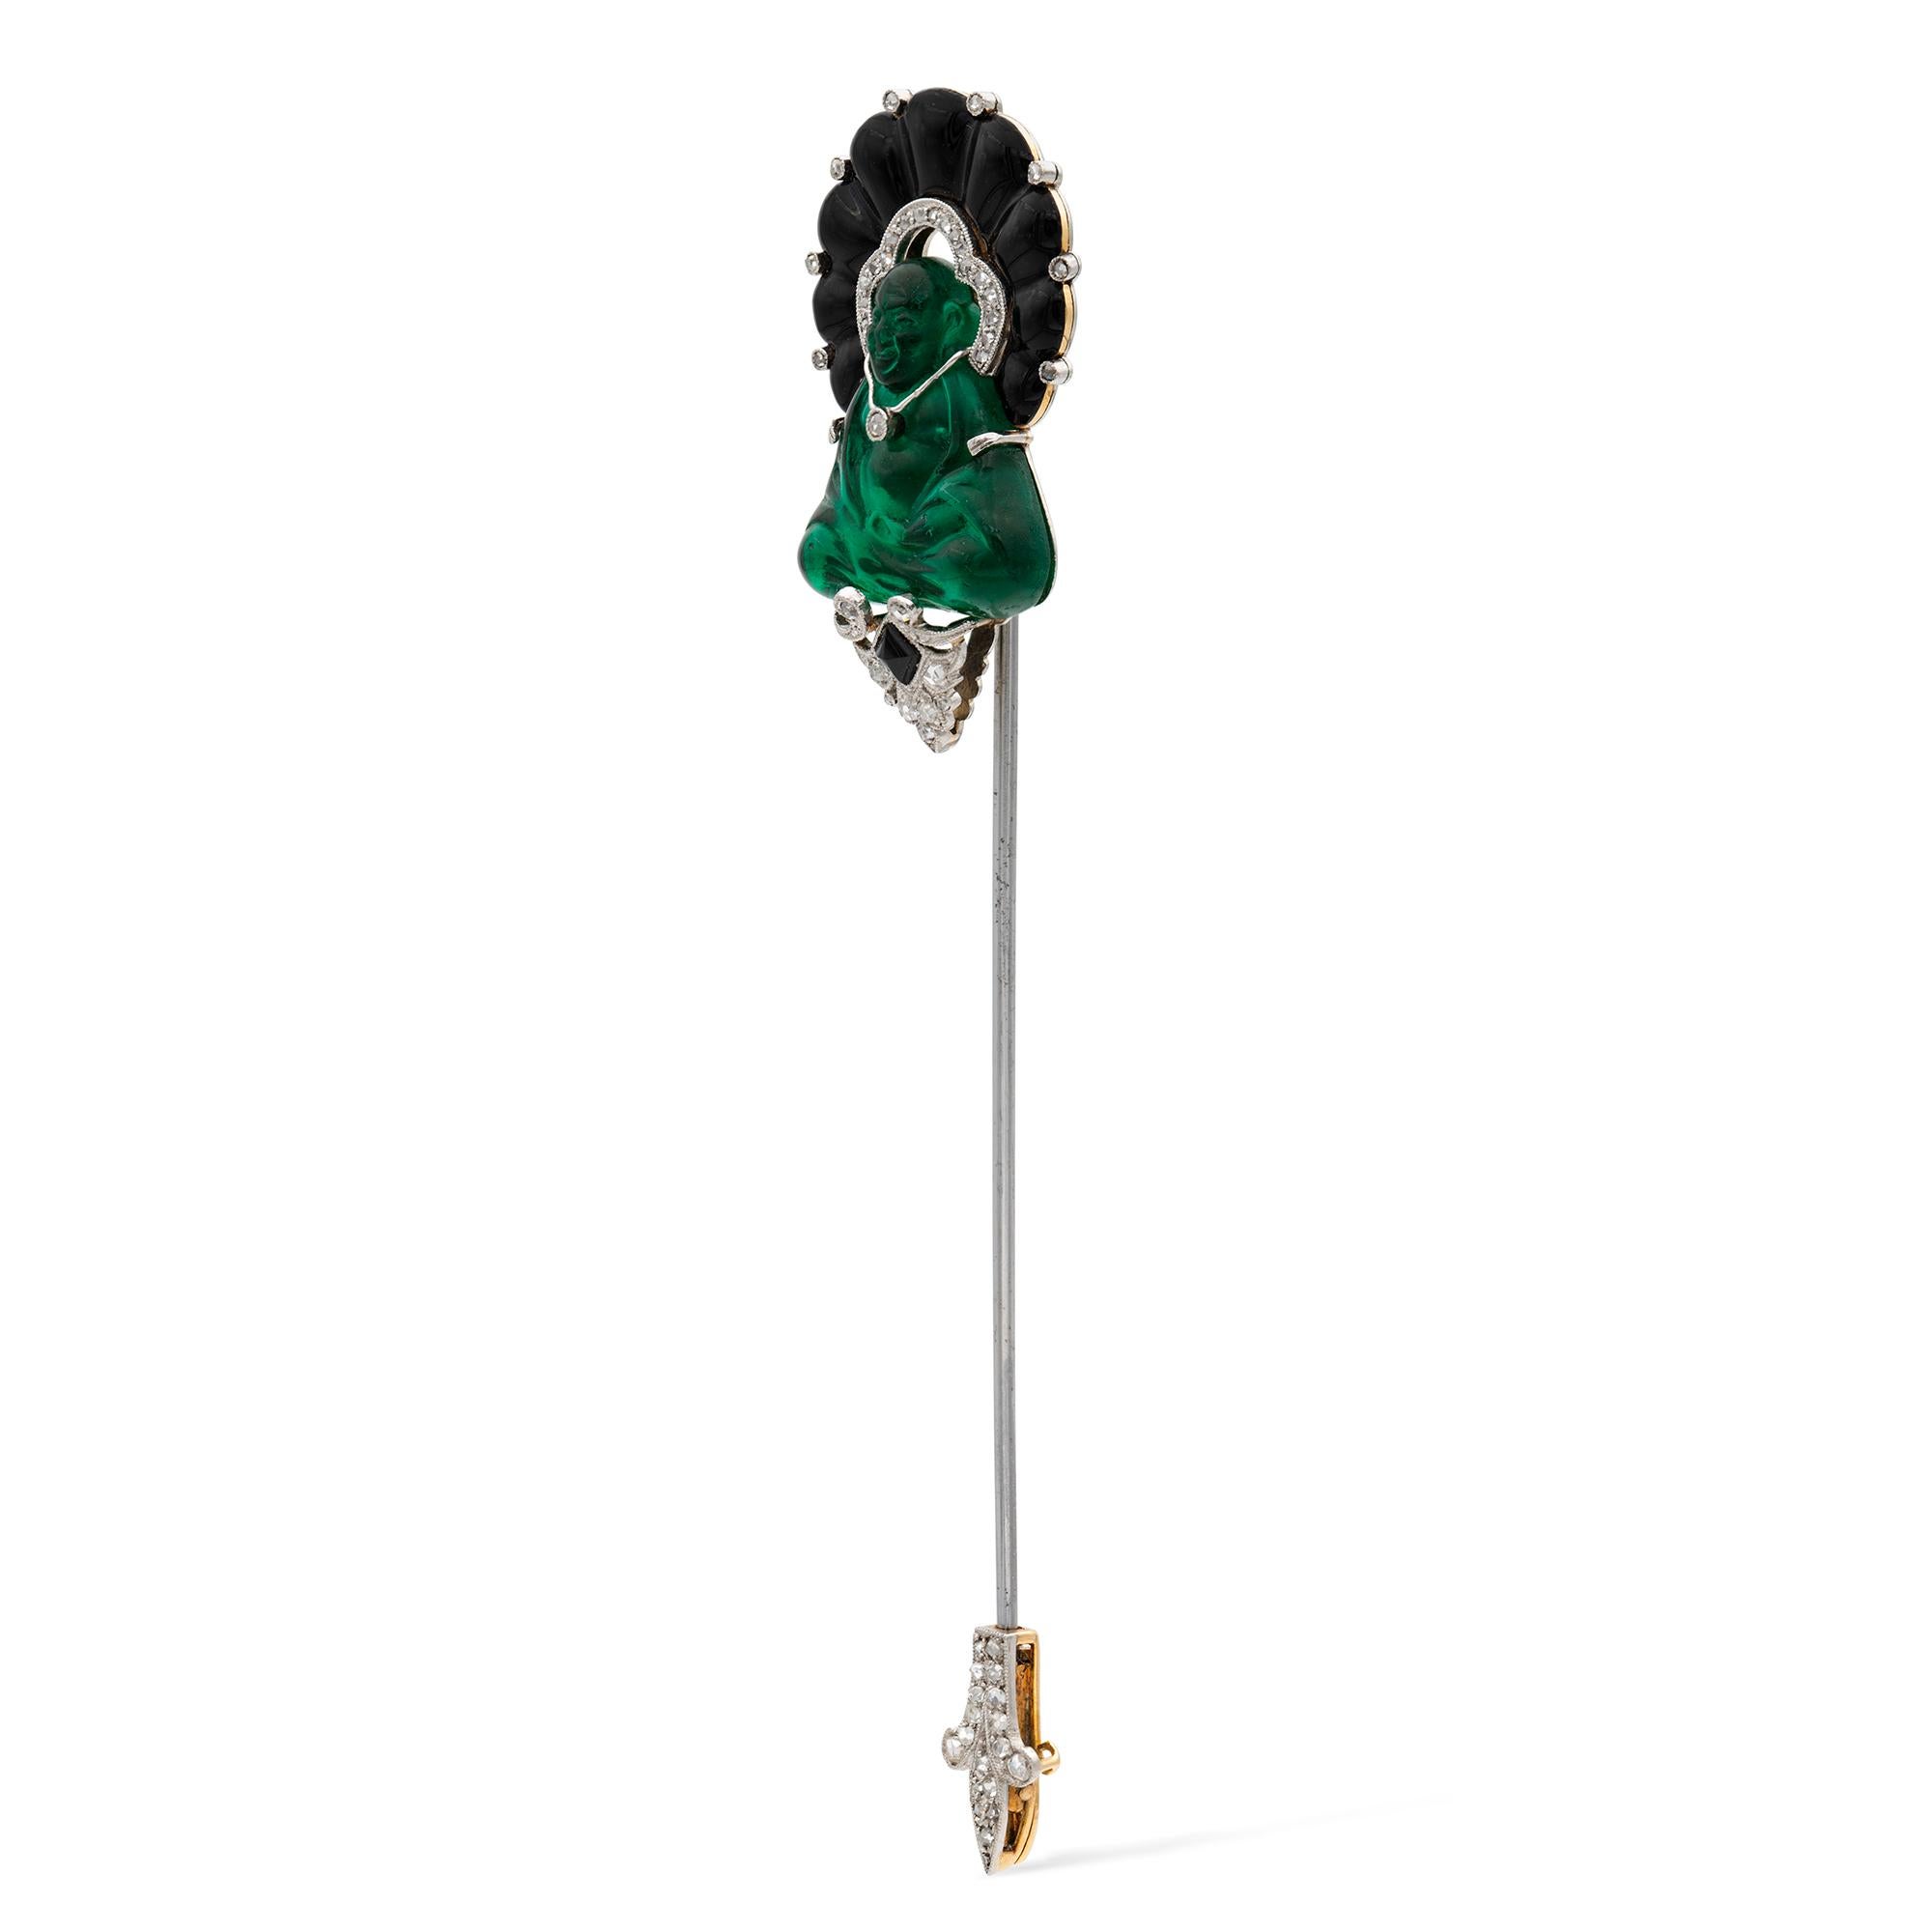 An Art Deco Buddha sureté pin by Ghiso, the pin set with a fine green pâte de verre Buddha, resting upon an onyx and rose-cut diamond cluster pedestal, and surmounted with a black enamel and rose-cut diamond crown, all to a platinum and yellow gold